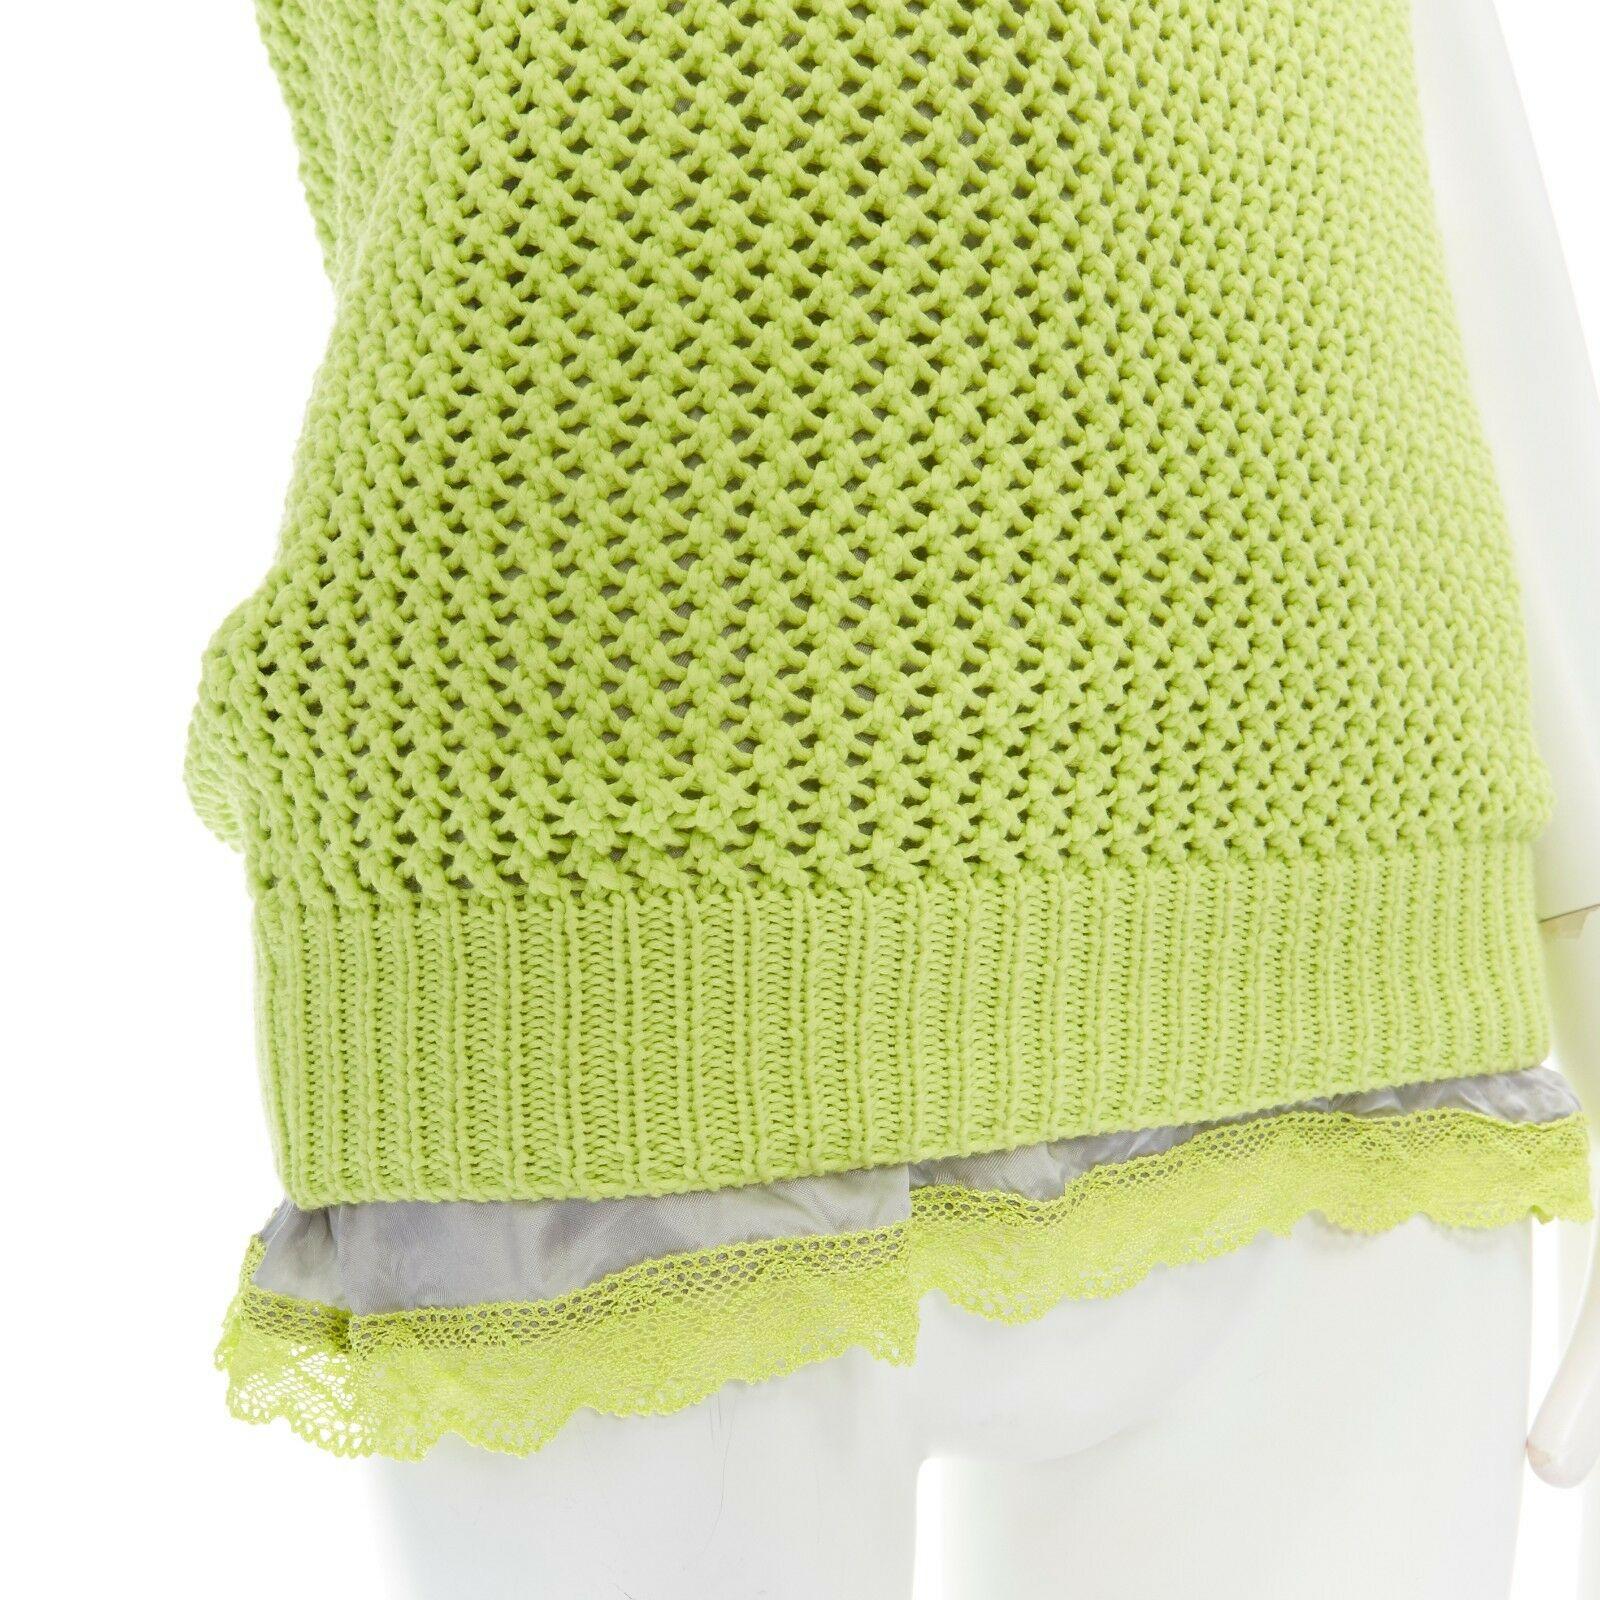 SACAI LUCK neon yellow grey lace trimmed camisole crochet knit sweater top JP3 L 4